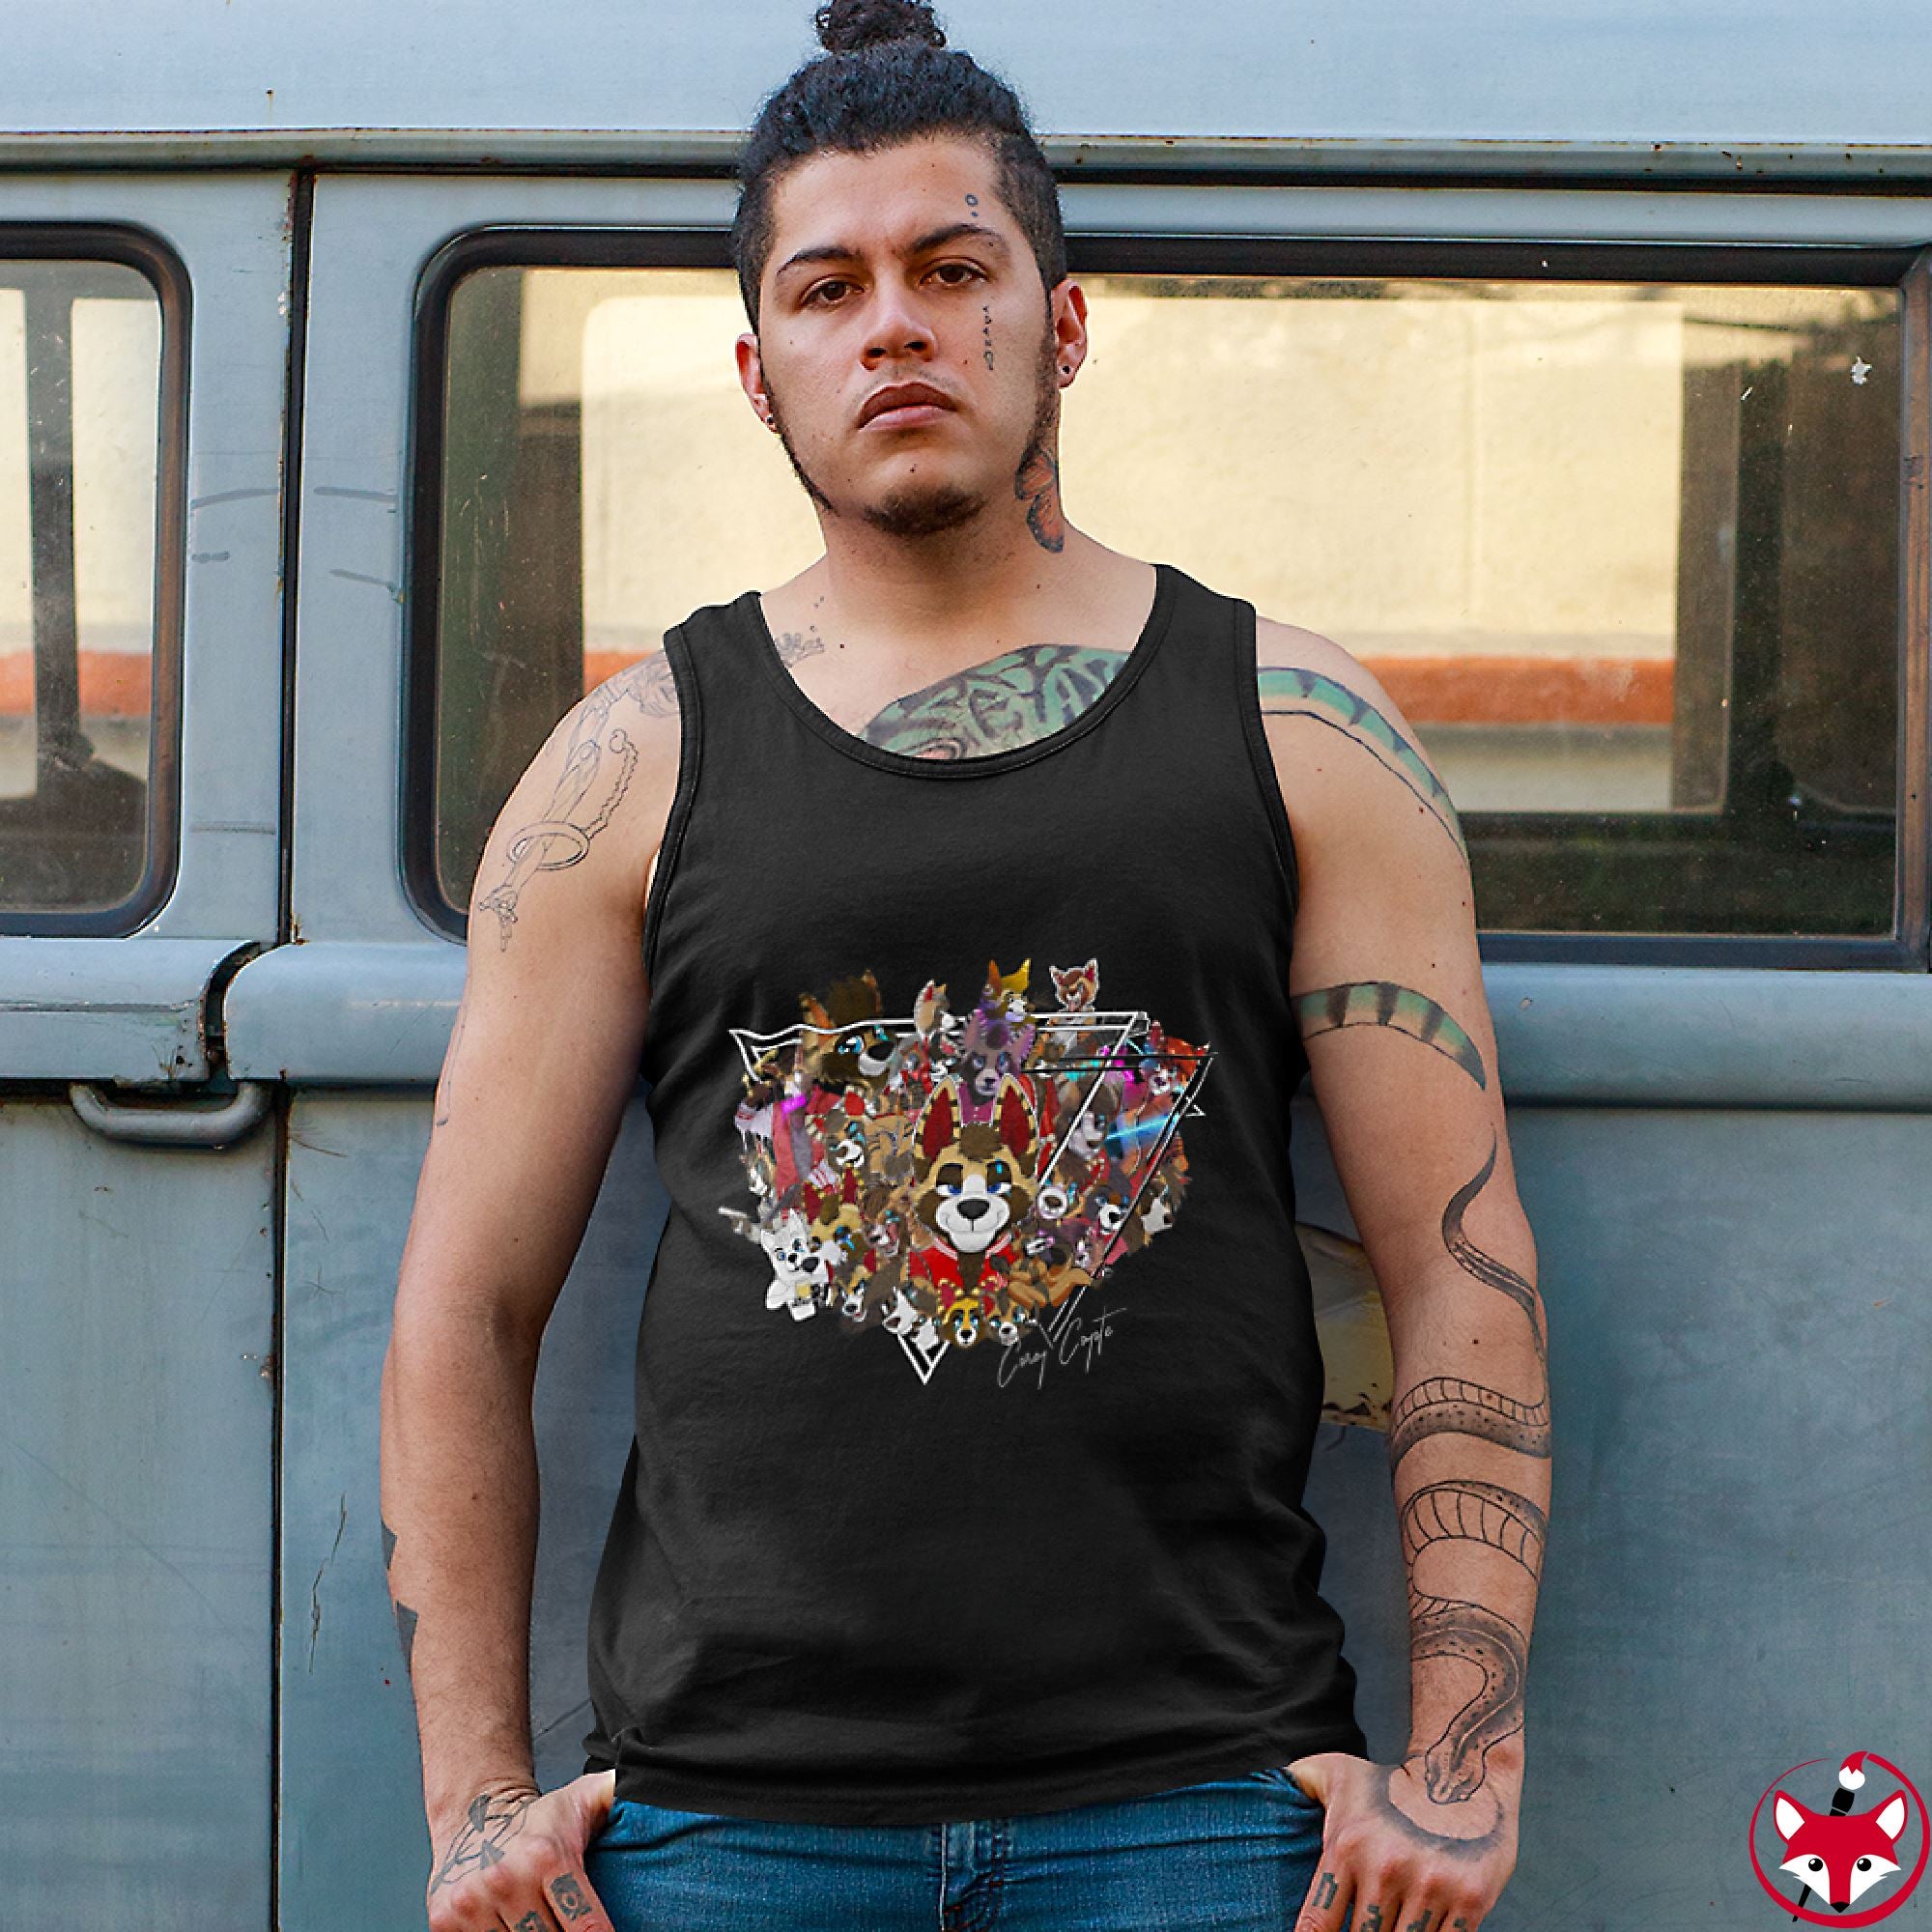 For The Fans - Tank Top Tank Top Corey Coyote 